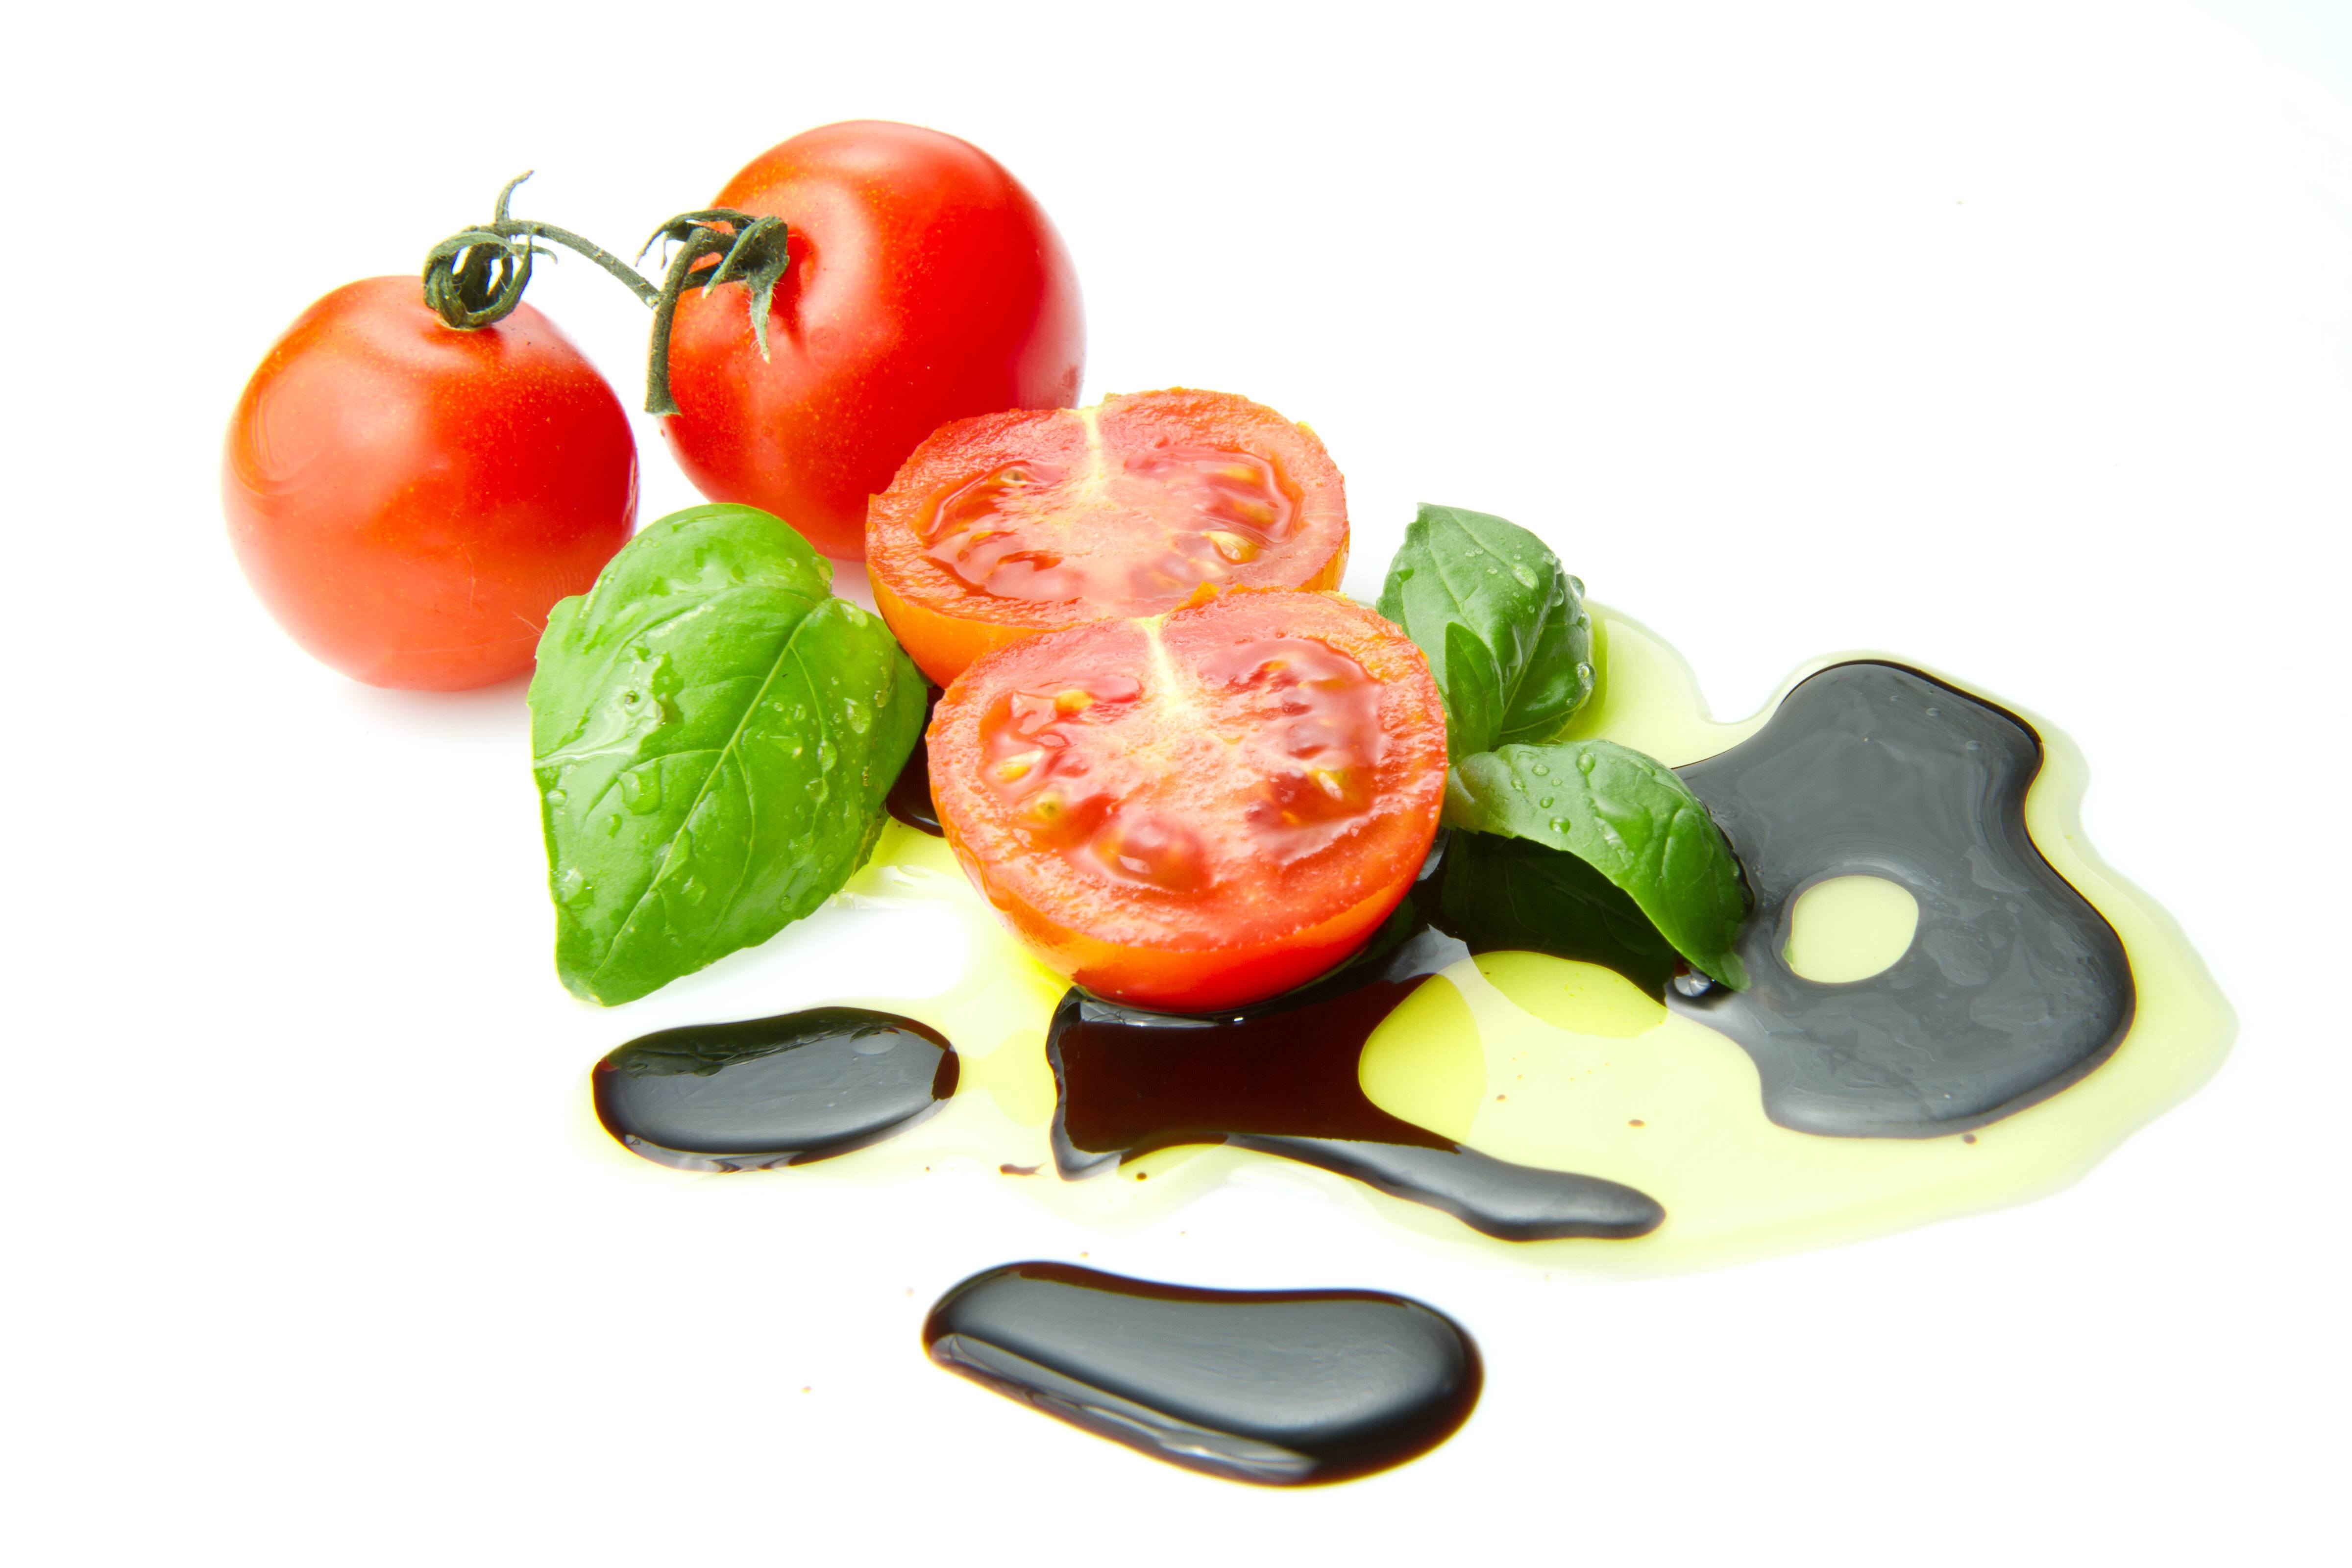 Fresh tomato with balsamic vinegar, why does healthy food taste so nasty